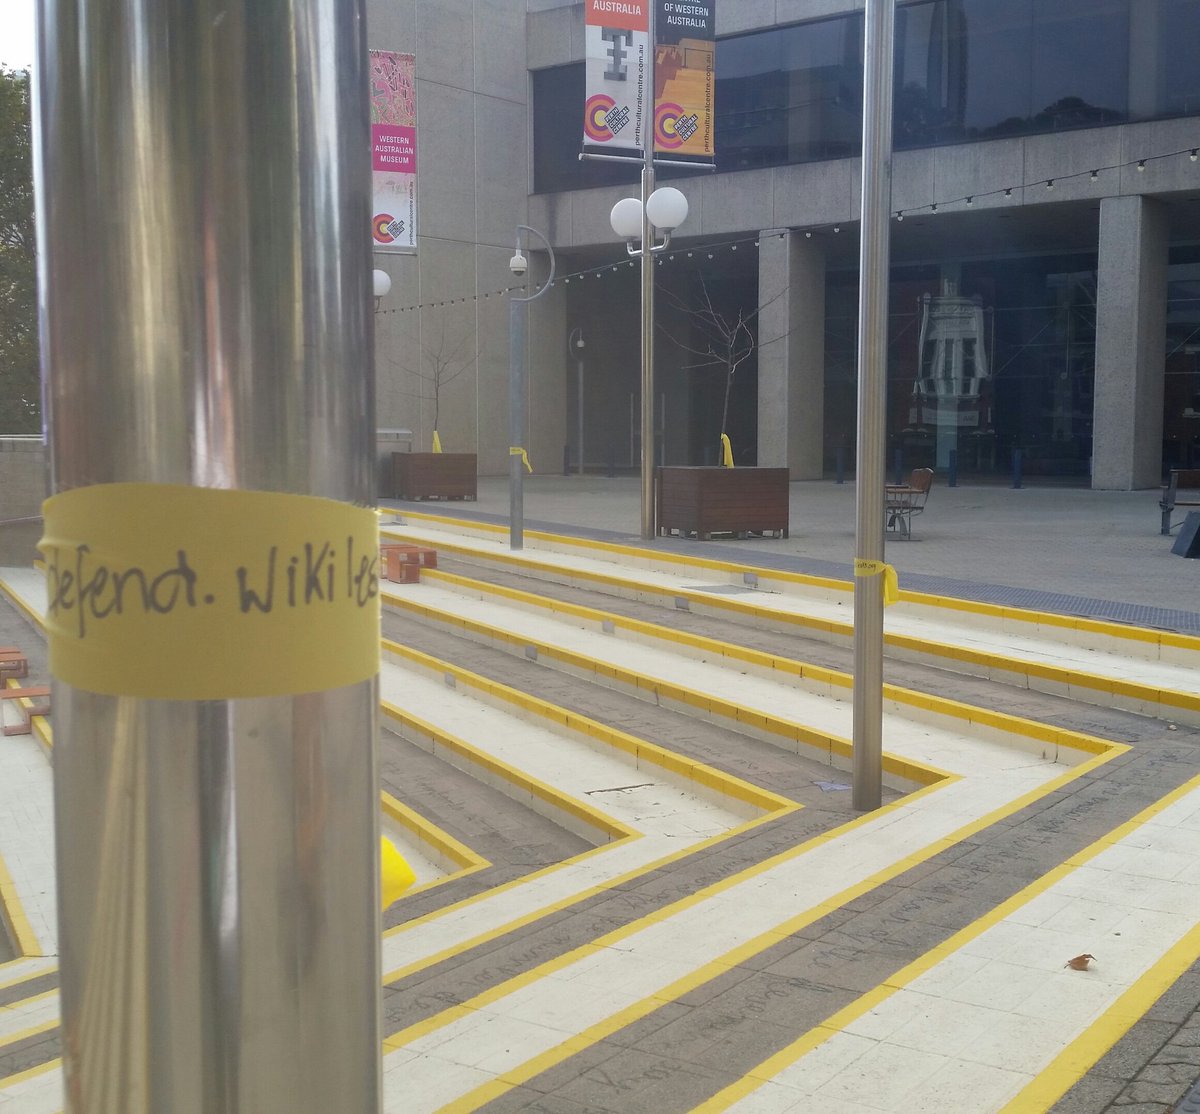 Yellow Ribbons for Assange works!
- Lots of people read the messages.
- Pick a location without cleaners or security as they might take them down. #YellowRibbons4Assange #Ribbons4Assange